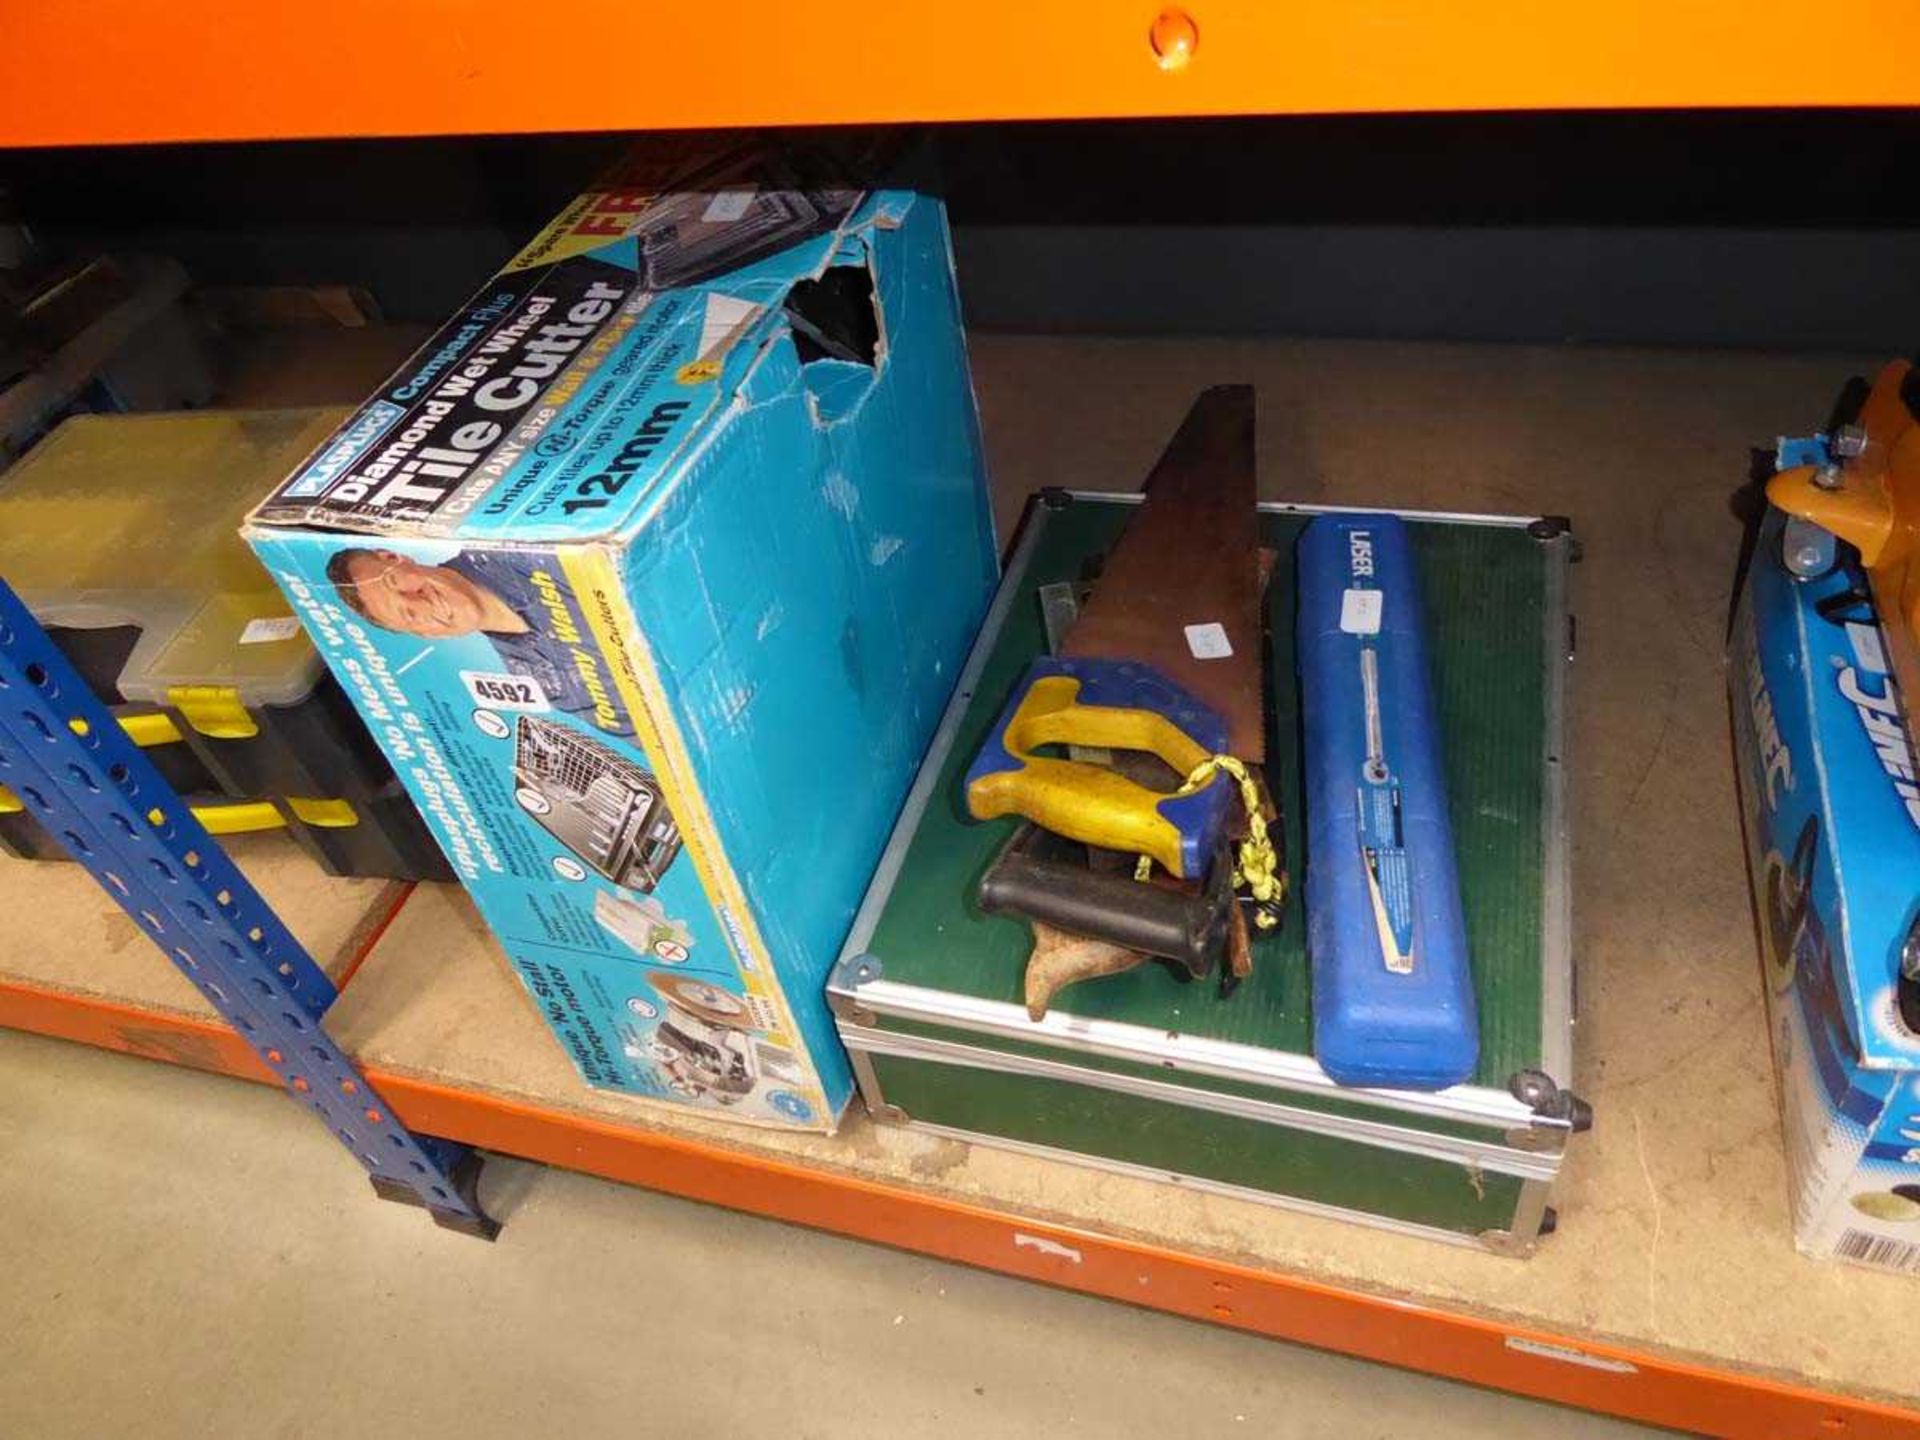 Tile cutter, saws, torque wrench and a green toolbox - Bild 2 aus 2